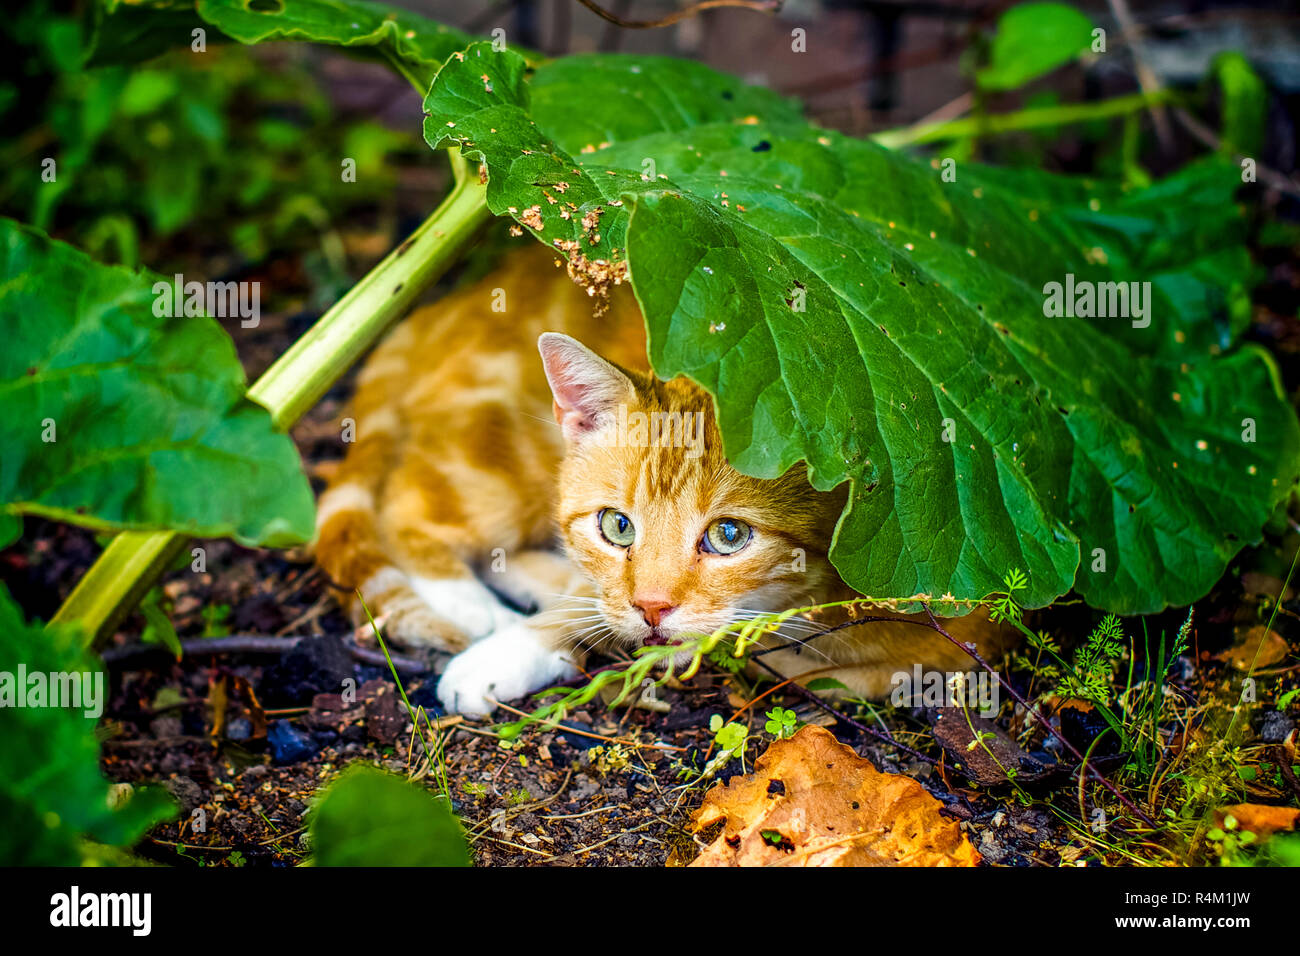 Cat on rhubarb. This is not a new dessert creation, but a shady place to sleep in the garden. A cat hides under a rhubarb leaf Stock Photo